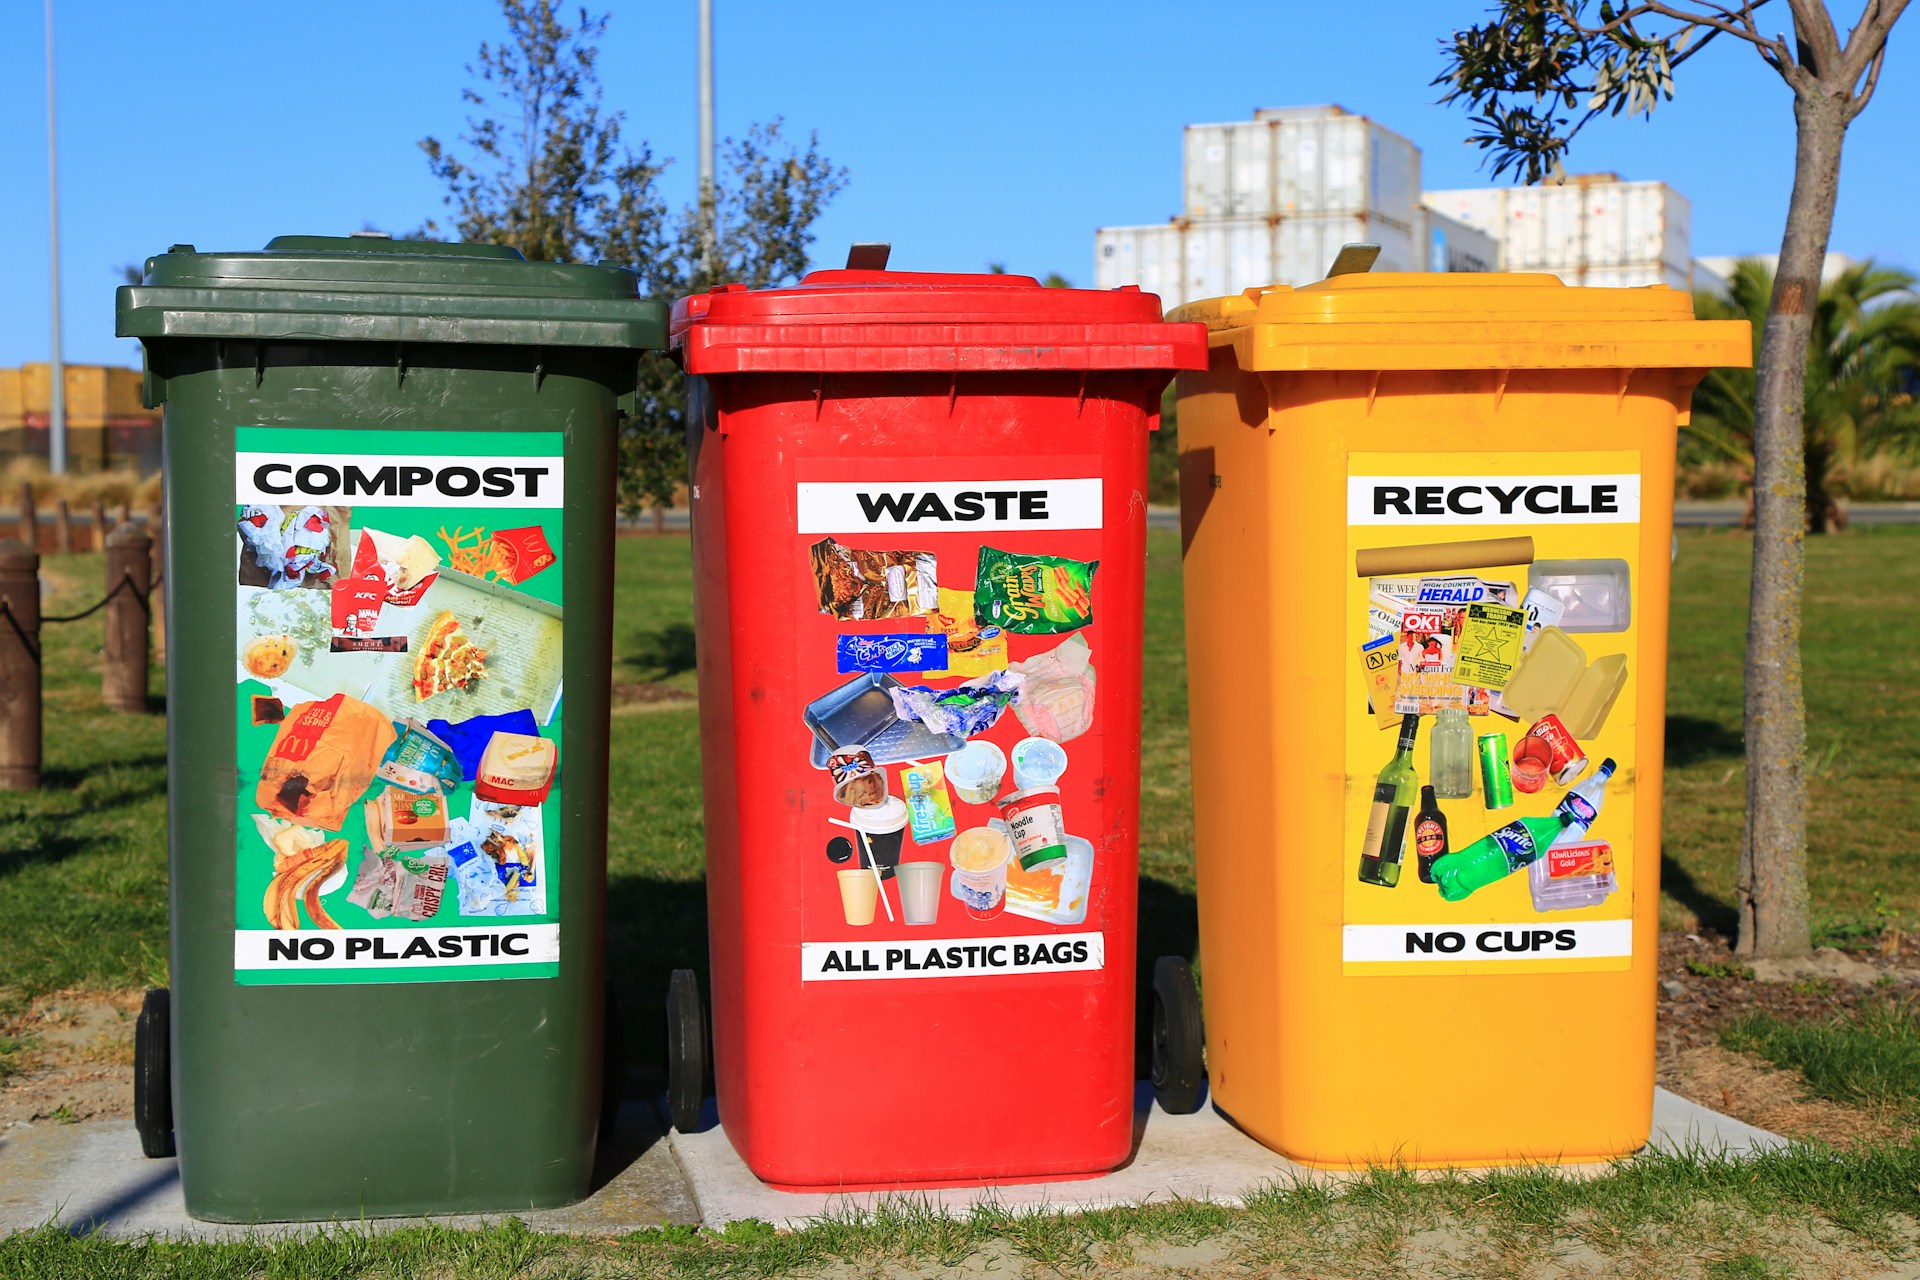 New recycling rules – Expert Reaction